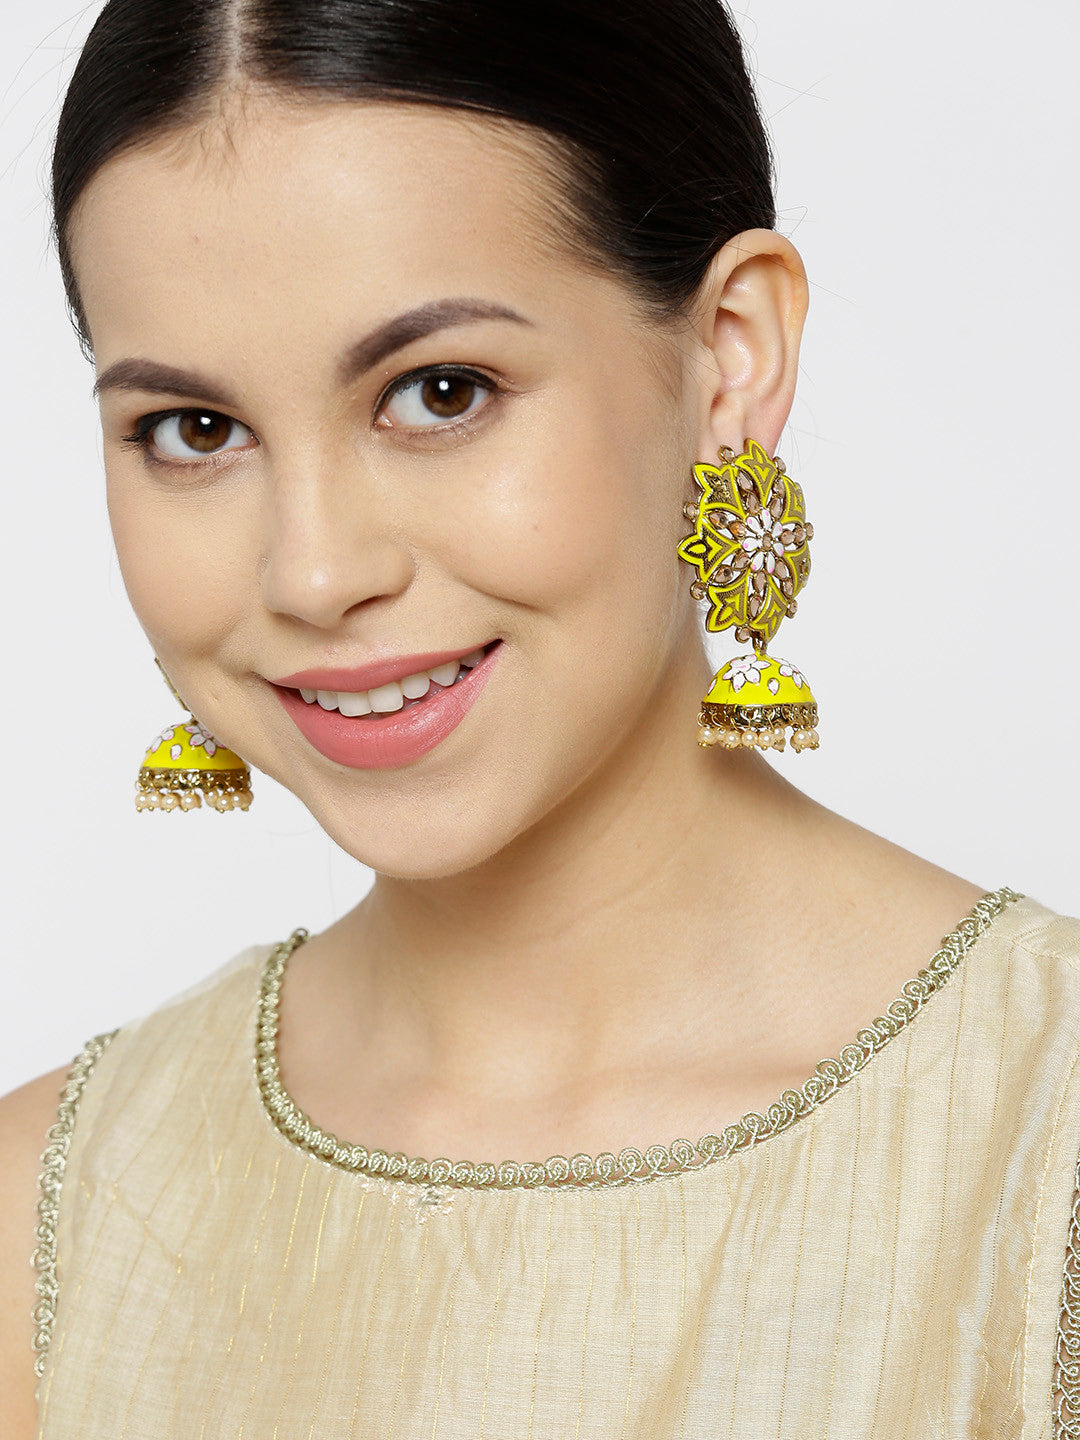 Classic Floral Shaped Yellow Jhumka Earring For Women And Girls